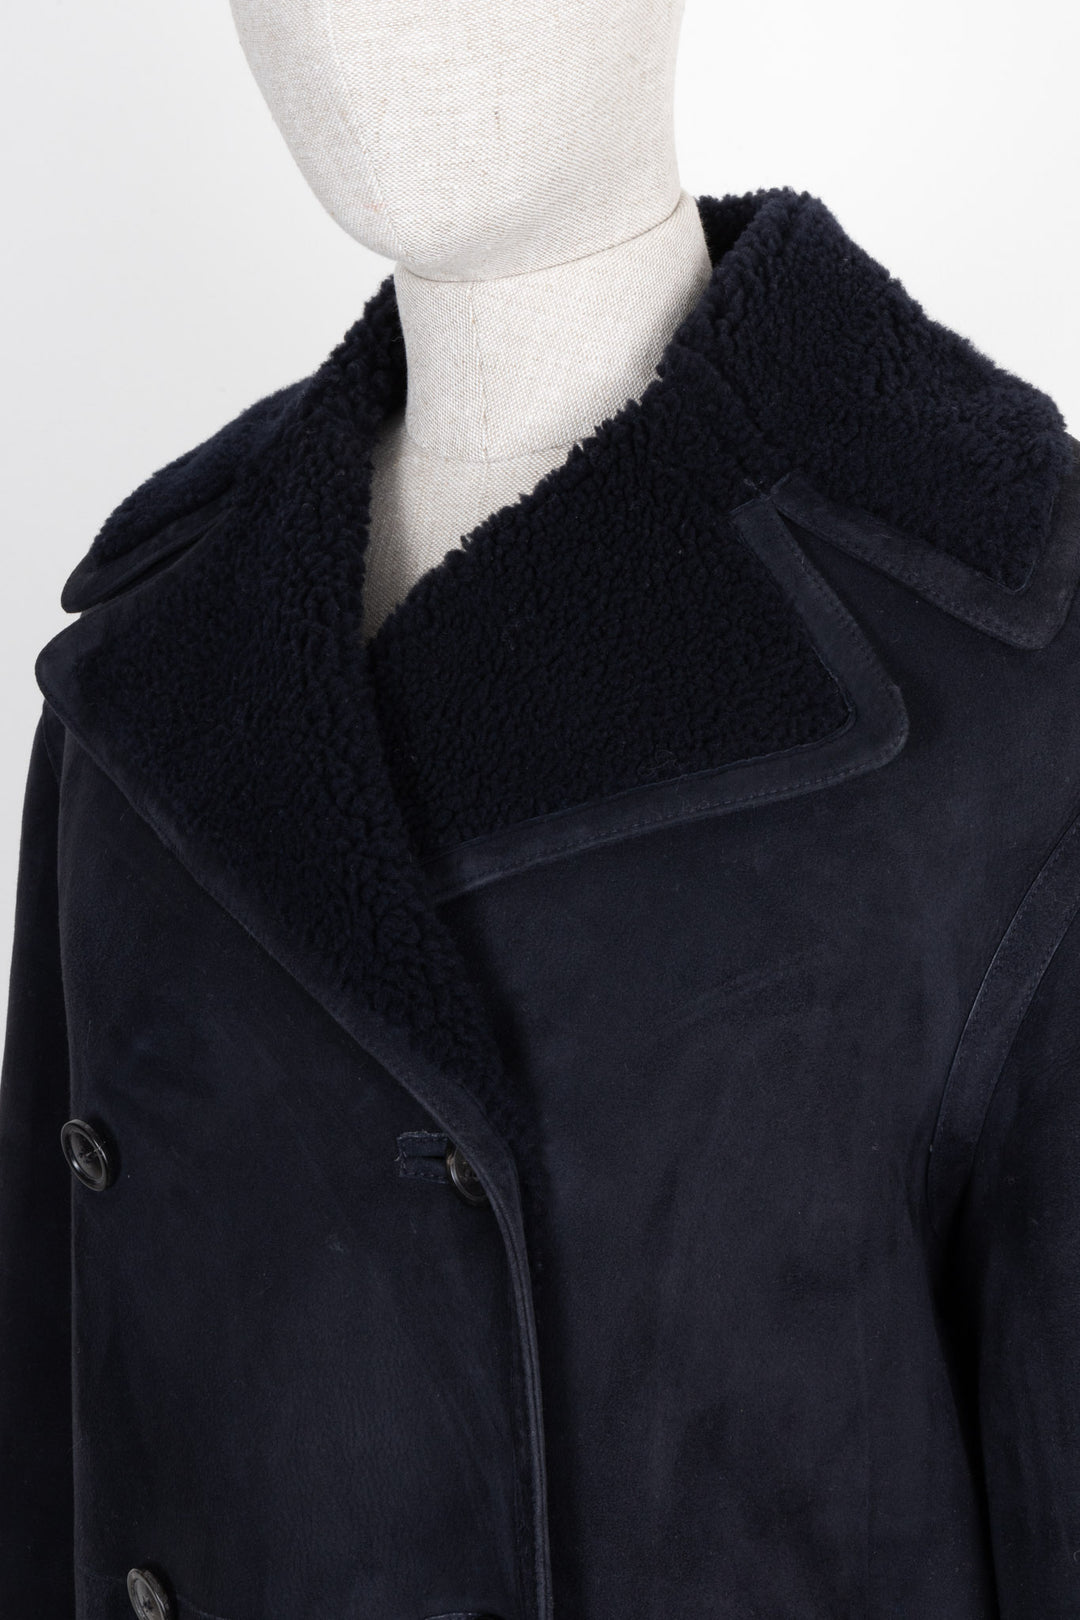 CHRISTIAN DIOR Reversible Double Breasted Coat